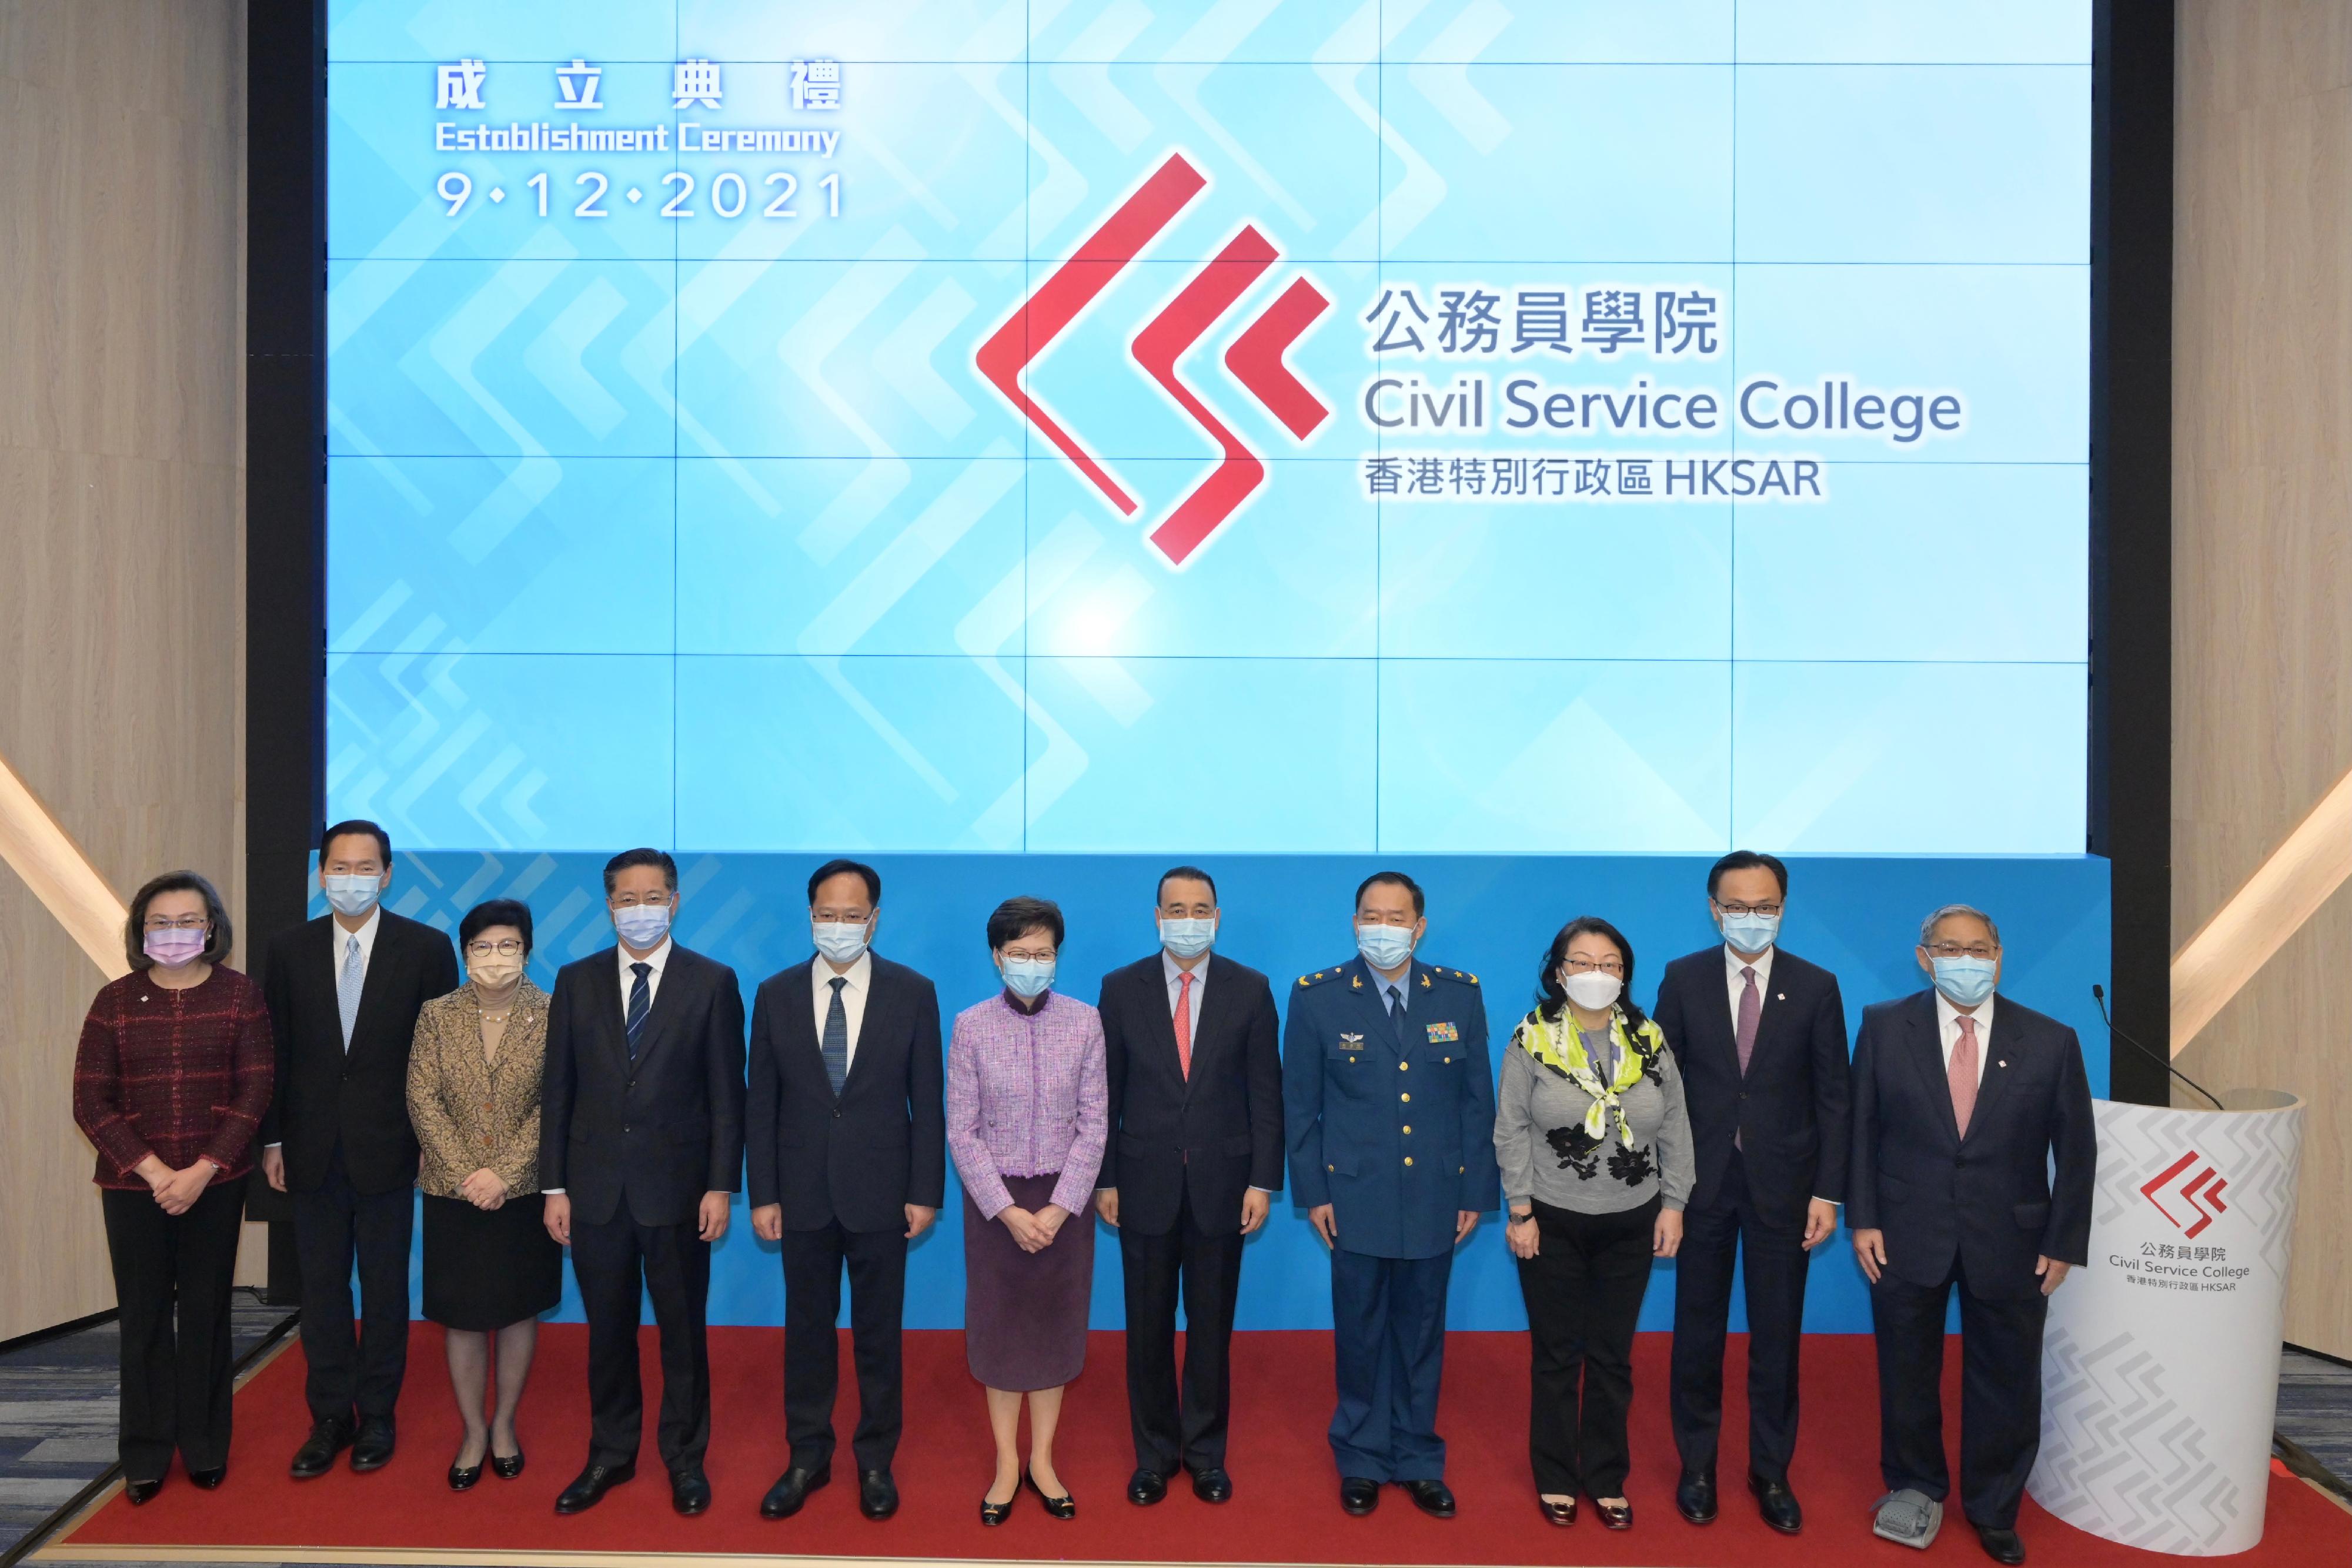 The Chief Executive, Mrs Carrie Lam, attended the Establishment Ceremony of the Civil Service College of the Hong Kong Special Administrative Region (HKSAR) today (December 9). Photo shows (from left) the Permanent Secretary for the Civil Service, Mrs Ingrid Yeung; the Convenor of the Non-official Members of the Executive Council, Mr Bernard Chan; the Chairman of the Public Service Commission, Mrs Rita Lau; Deputy Head of the Office for Safeguarding National Security of the Central People's Government in the HKSAR Mr Li Jiangzhou; Deputy Director of the Liaison Office of the Central People's Government in the HKSAR Mr Chen Dong; Mrs Lam; the Commissioner of the Ministry of Foreign Affairs of the People's Republic of China in the HKSAR, Mr Liu Guangyuan; the Director of the Political Department of the Chinese People's Liberation Army Hong Kong Garrison, Major General Sun Jushun; the Secretary for Justice, Ms Teresa Cheng, SC;  the Secretary for the Civil Service, Mr Patrick Nip; and the Chairman of the Civil Service Training Advisory Board, Dr Victor Fung, at the ceremony.